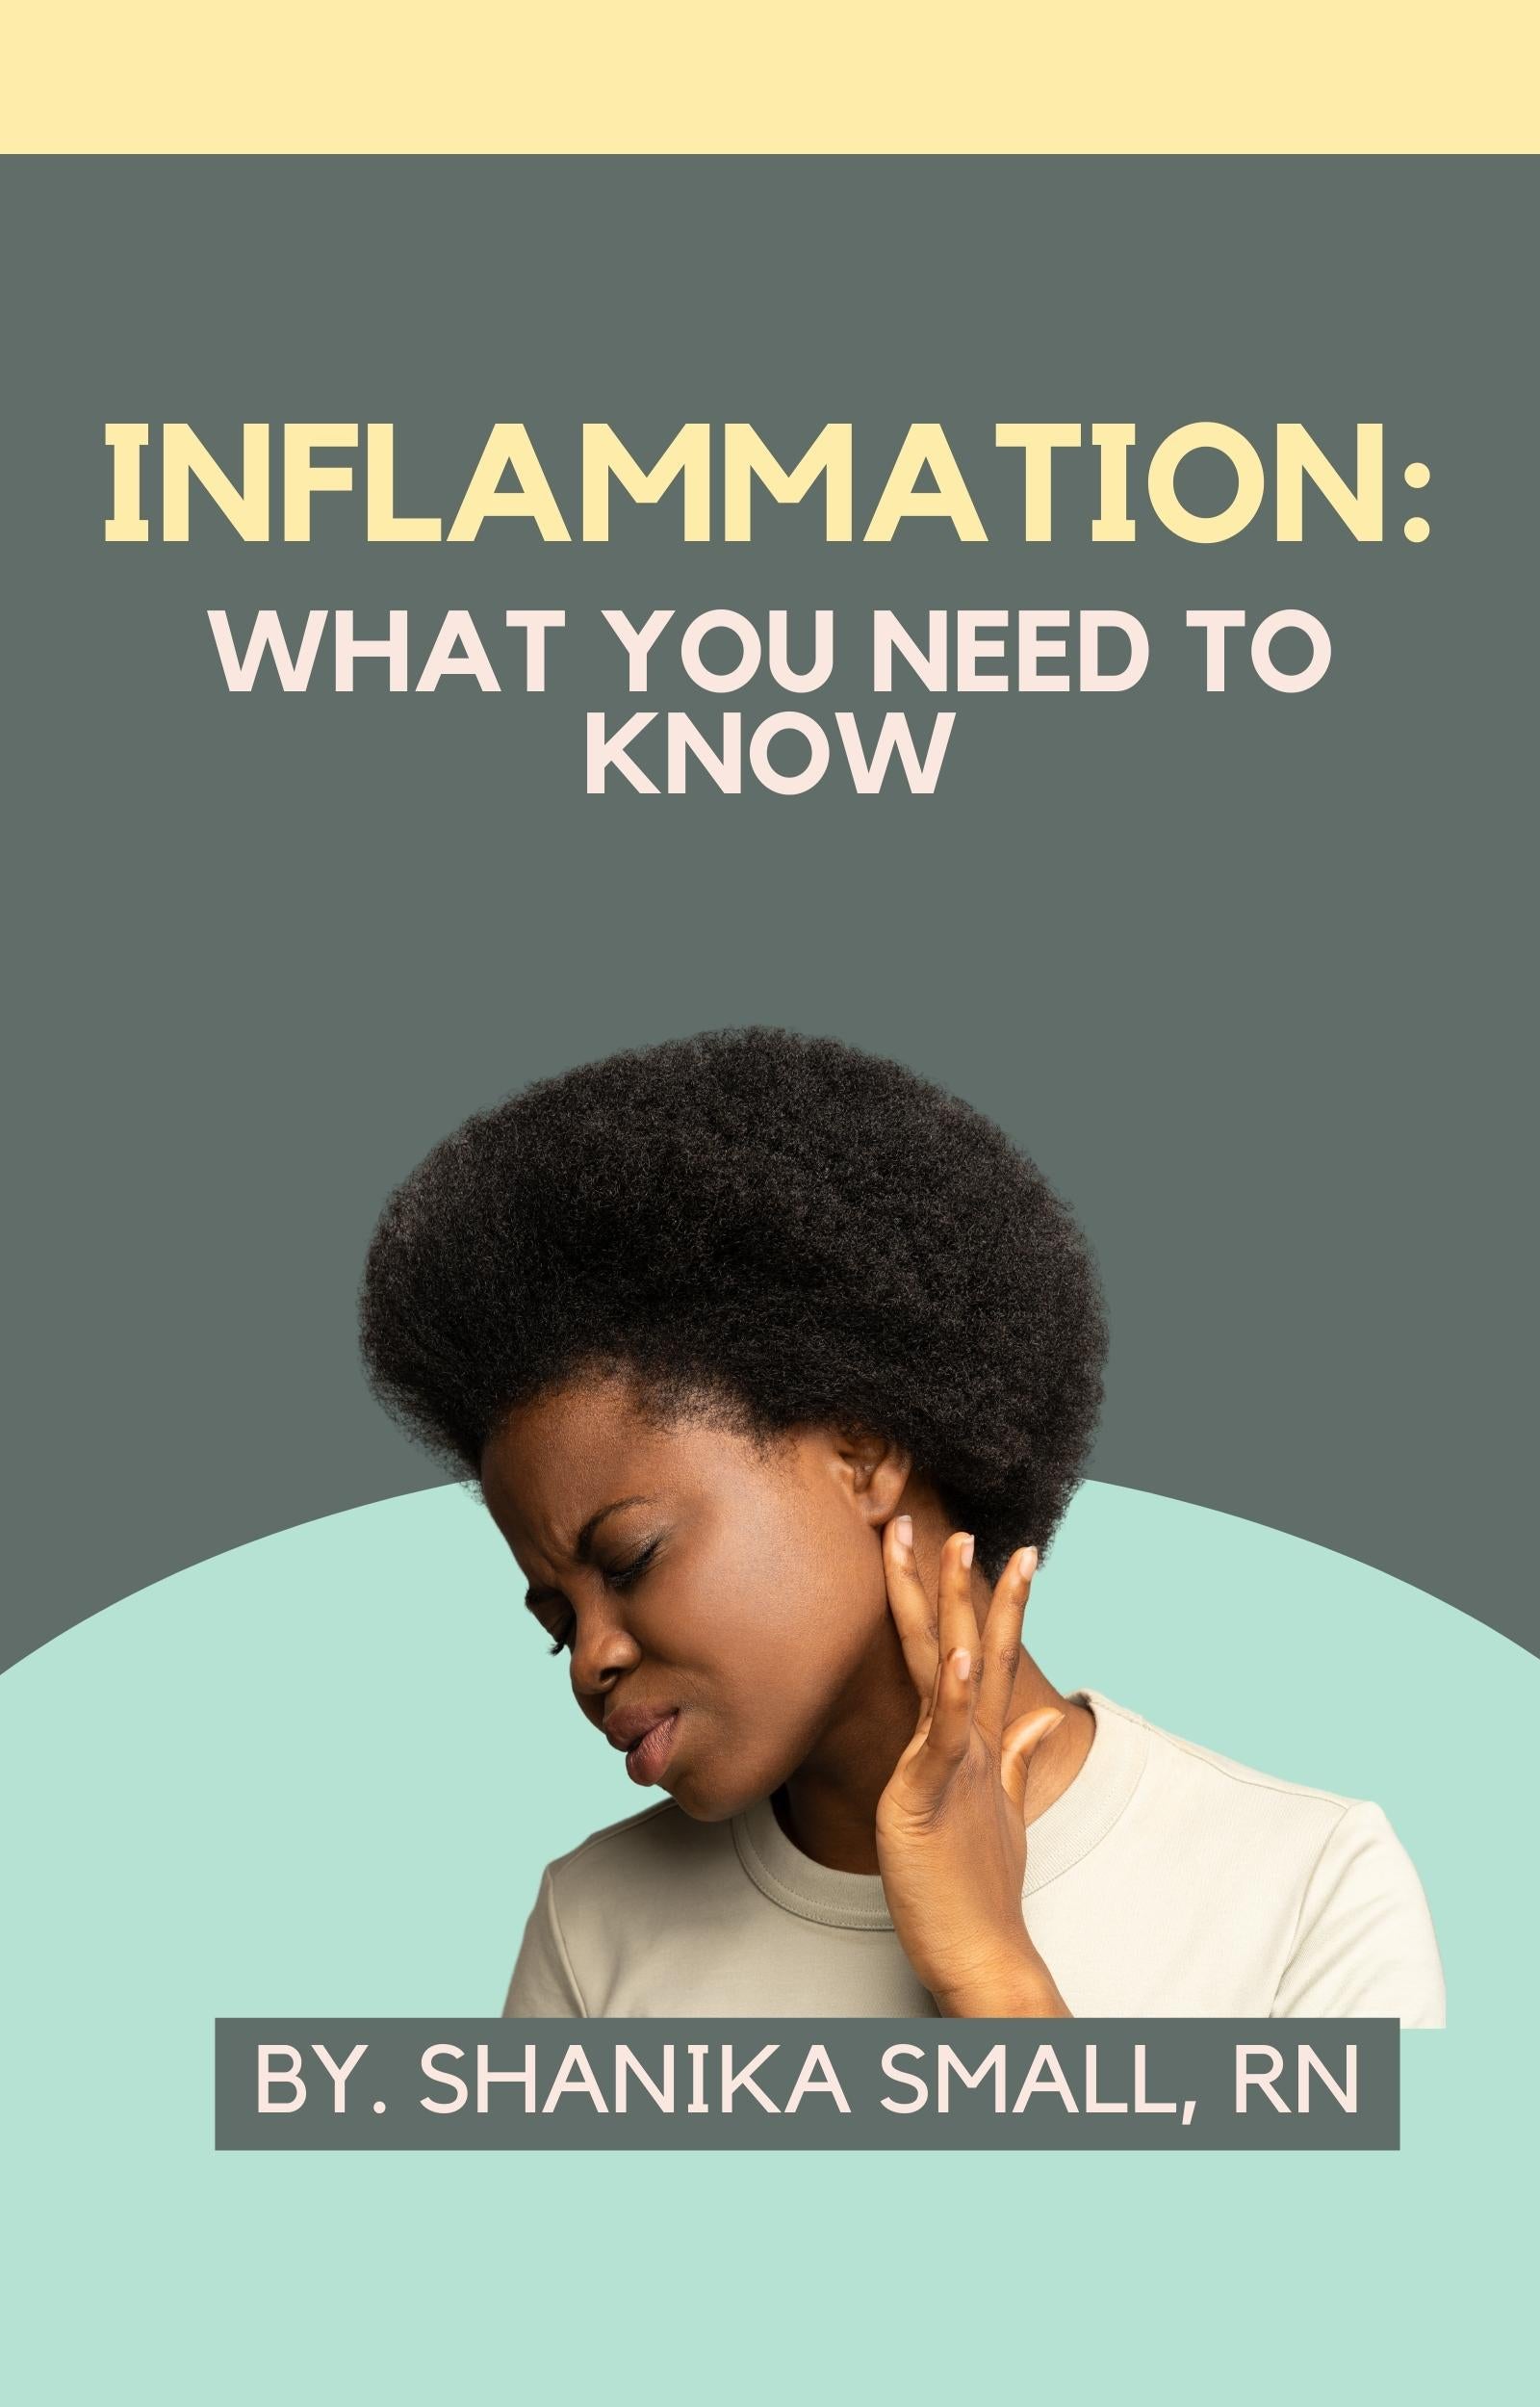 Inflammation: What you need to know